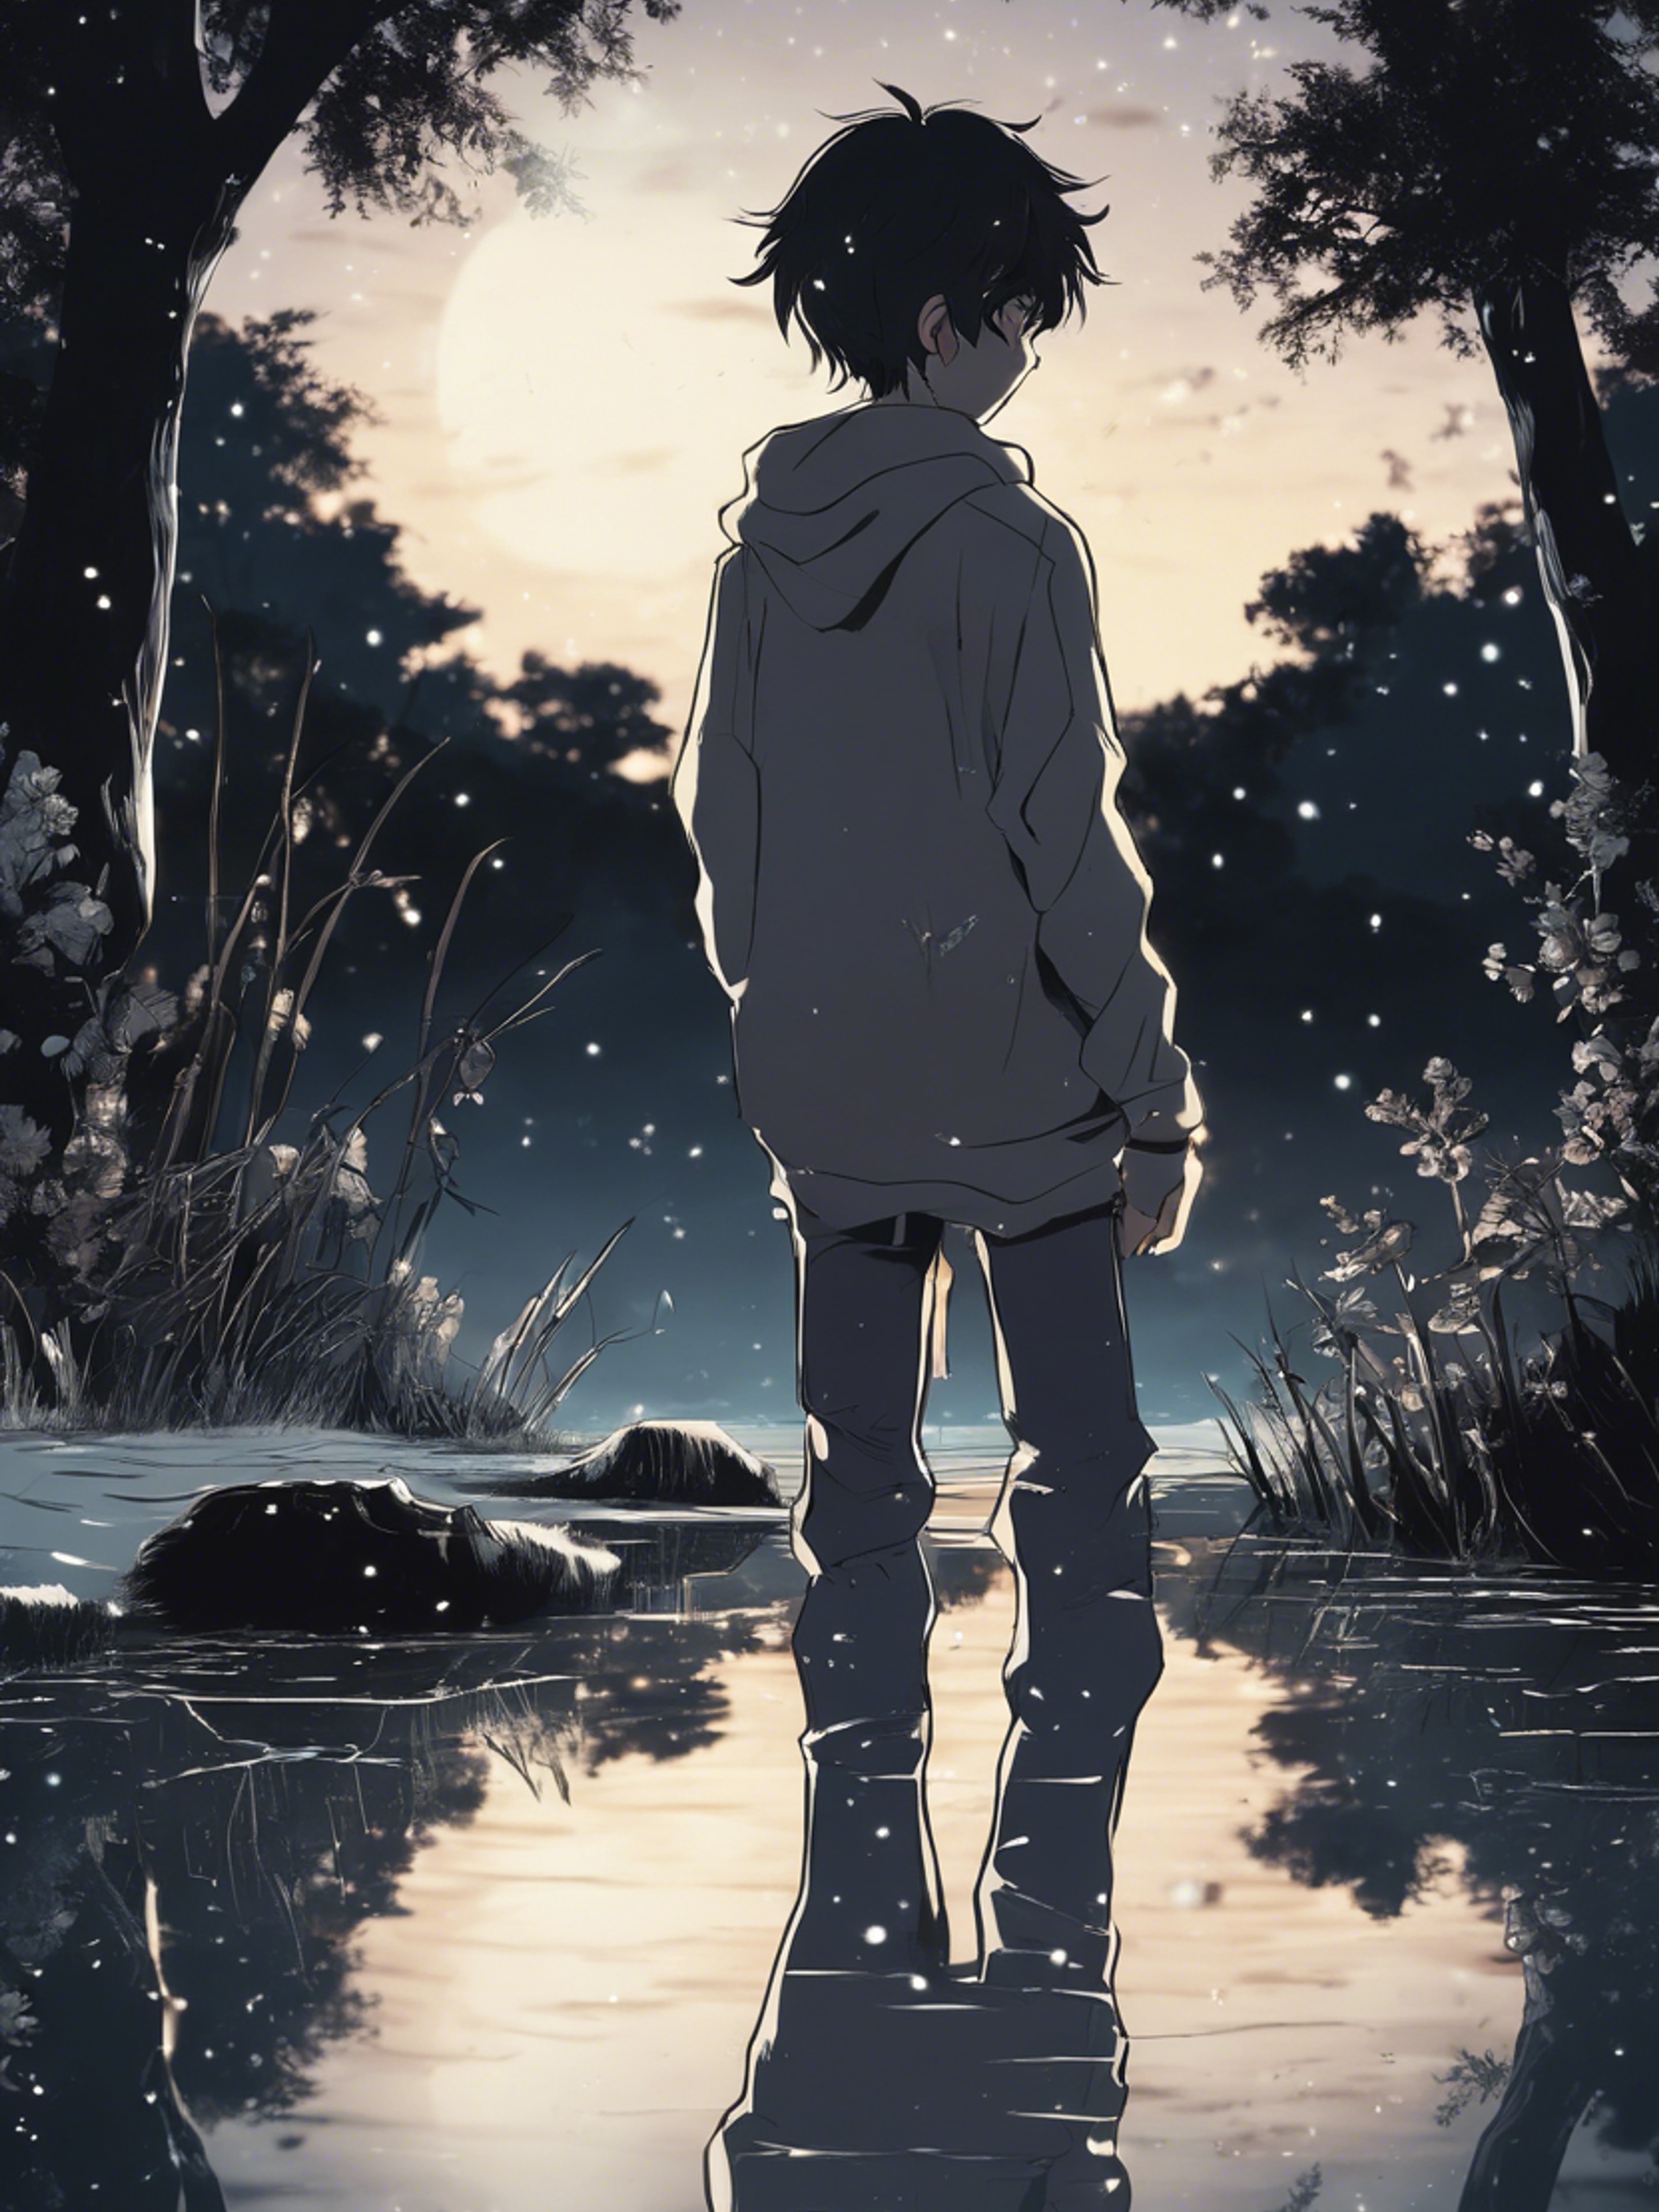 A troubled anime boy looking at his reflection in a pond under the moonlight. Wallpaper[55bb5e2deb6c4703873c]